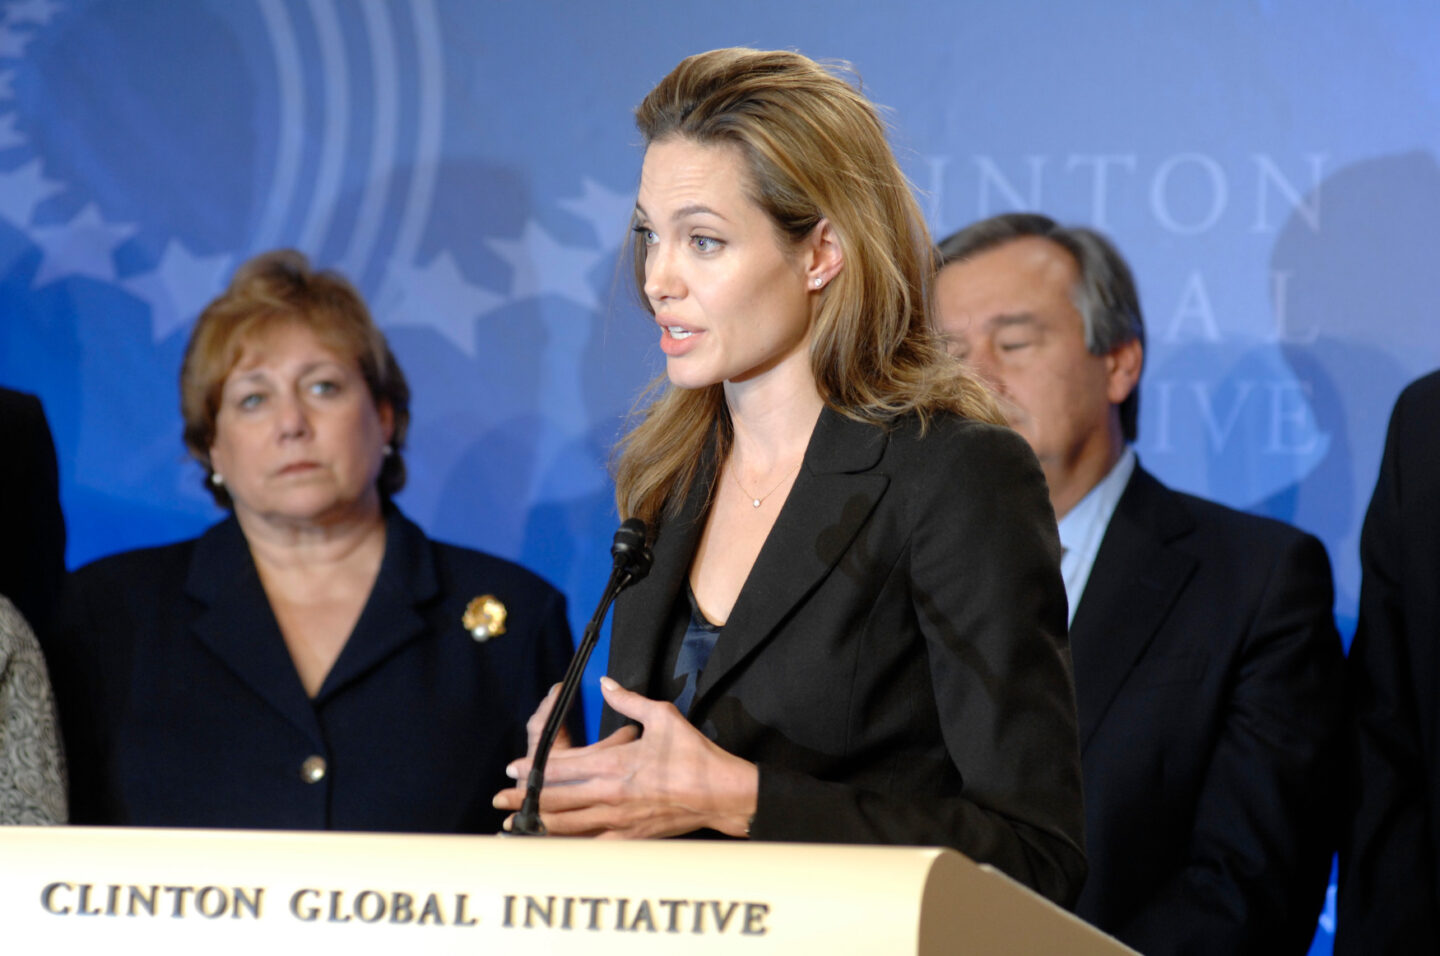 Angelina Jolie speaks at a press conference